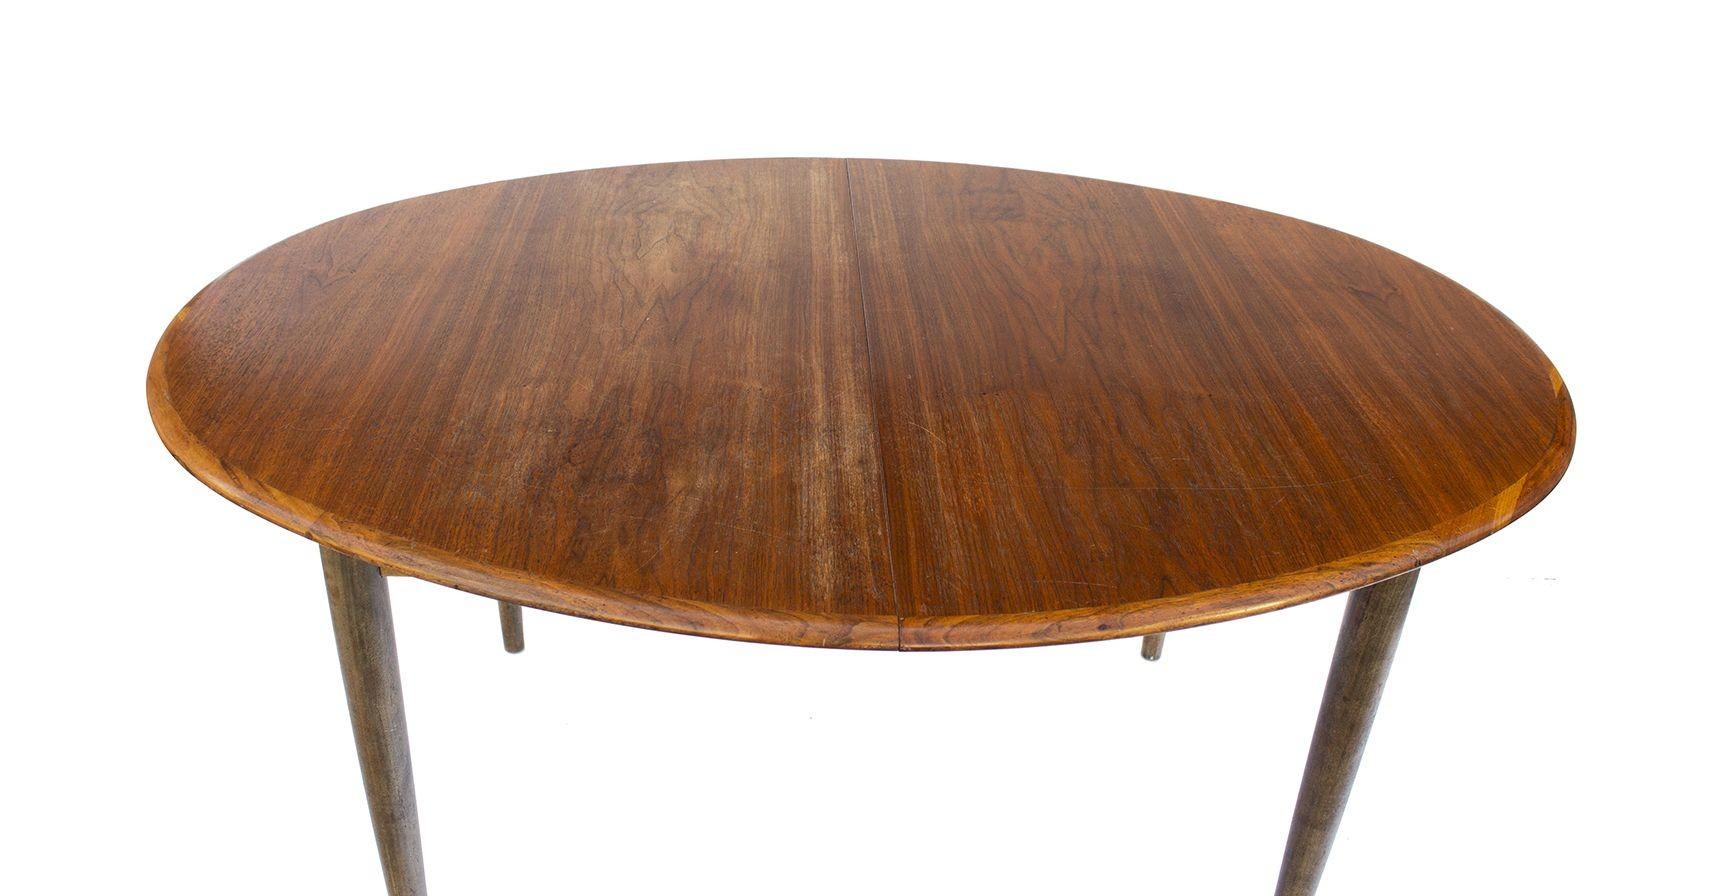 Mid-20th Century Oval Danish Teak Dining Table with 2 Leaves by Gudme Mobelfabrik